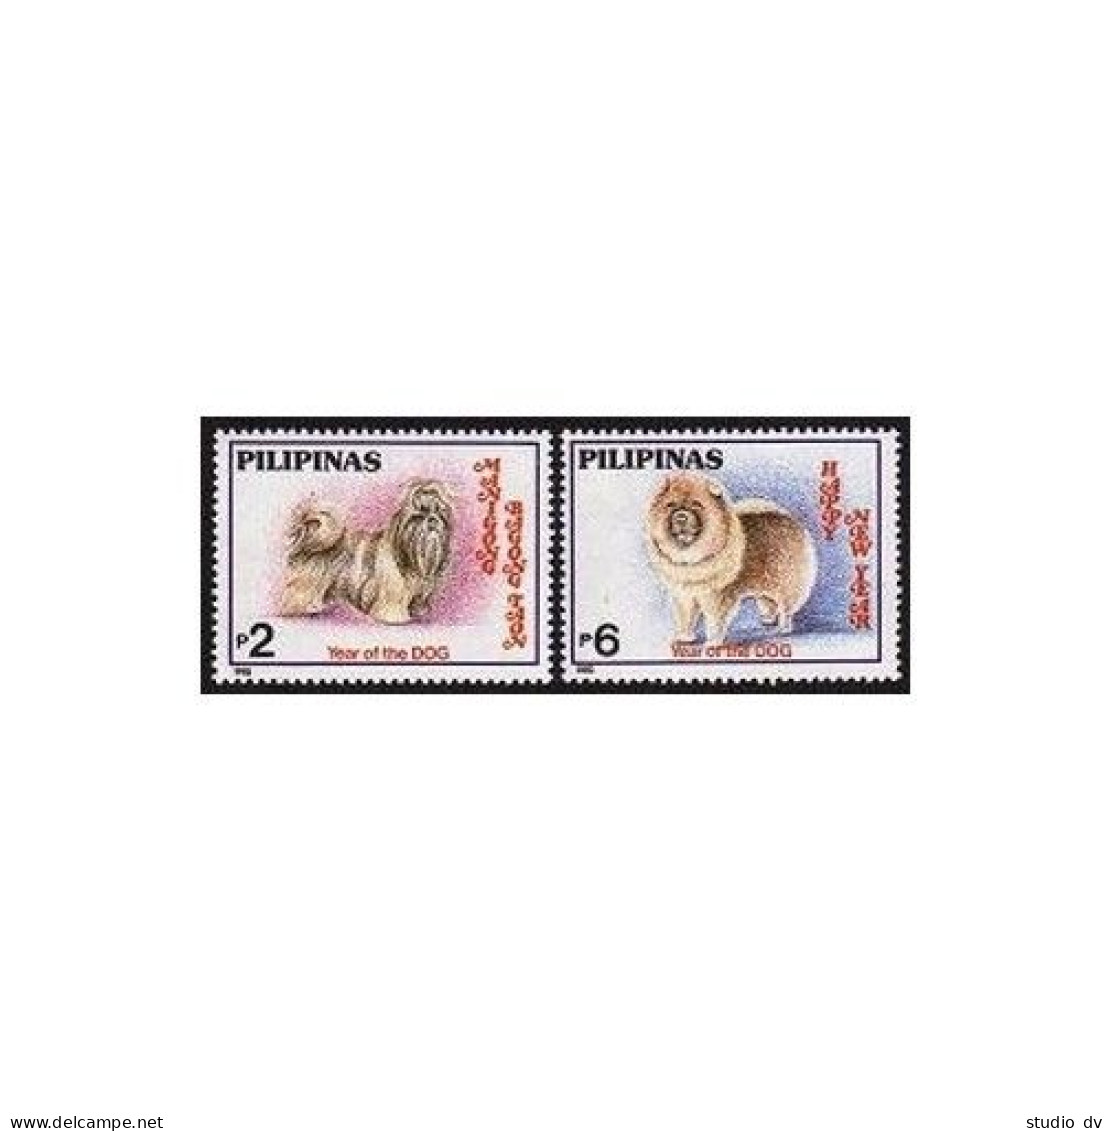 Philippines 2284-2285,2285a A,B,MNH. New Year 1994,Lunar Year Of The Dog. - Filippine